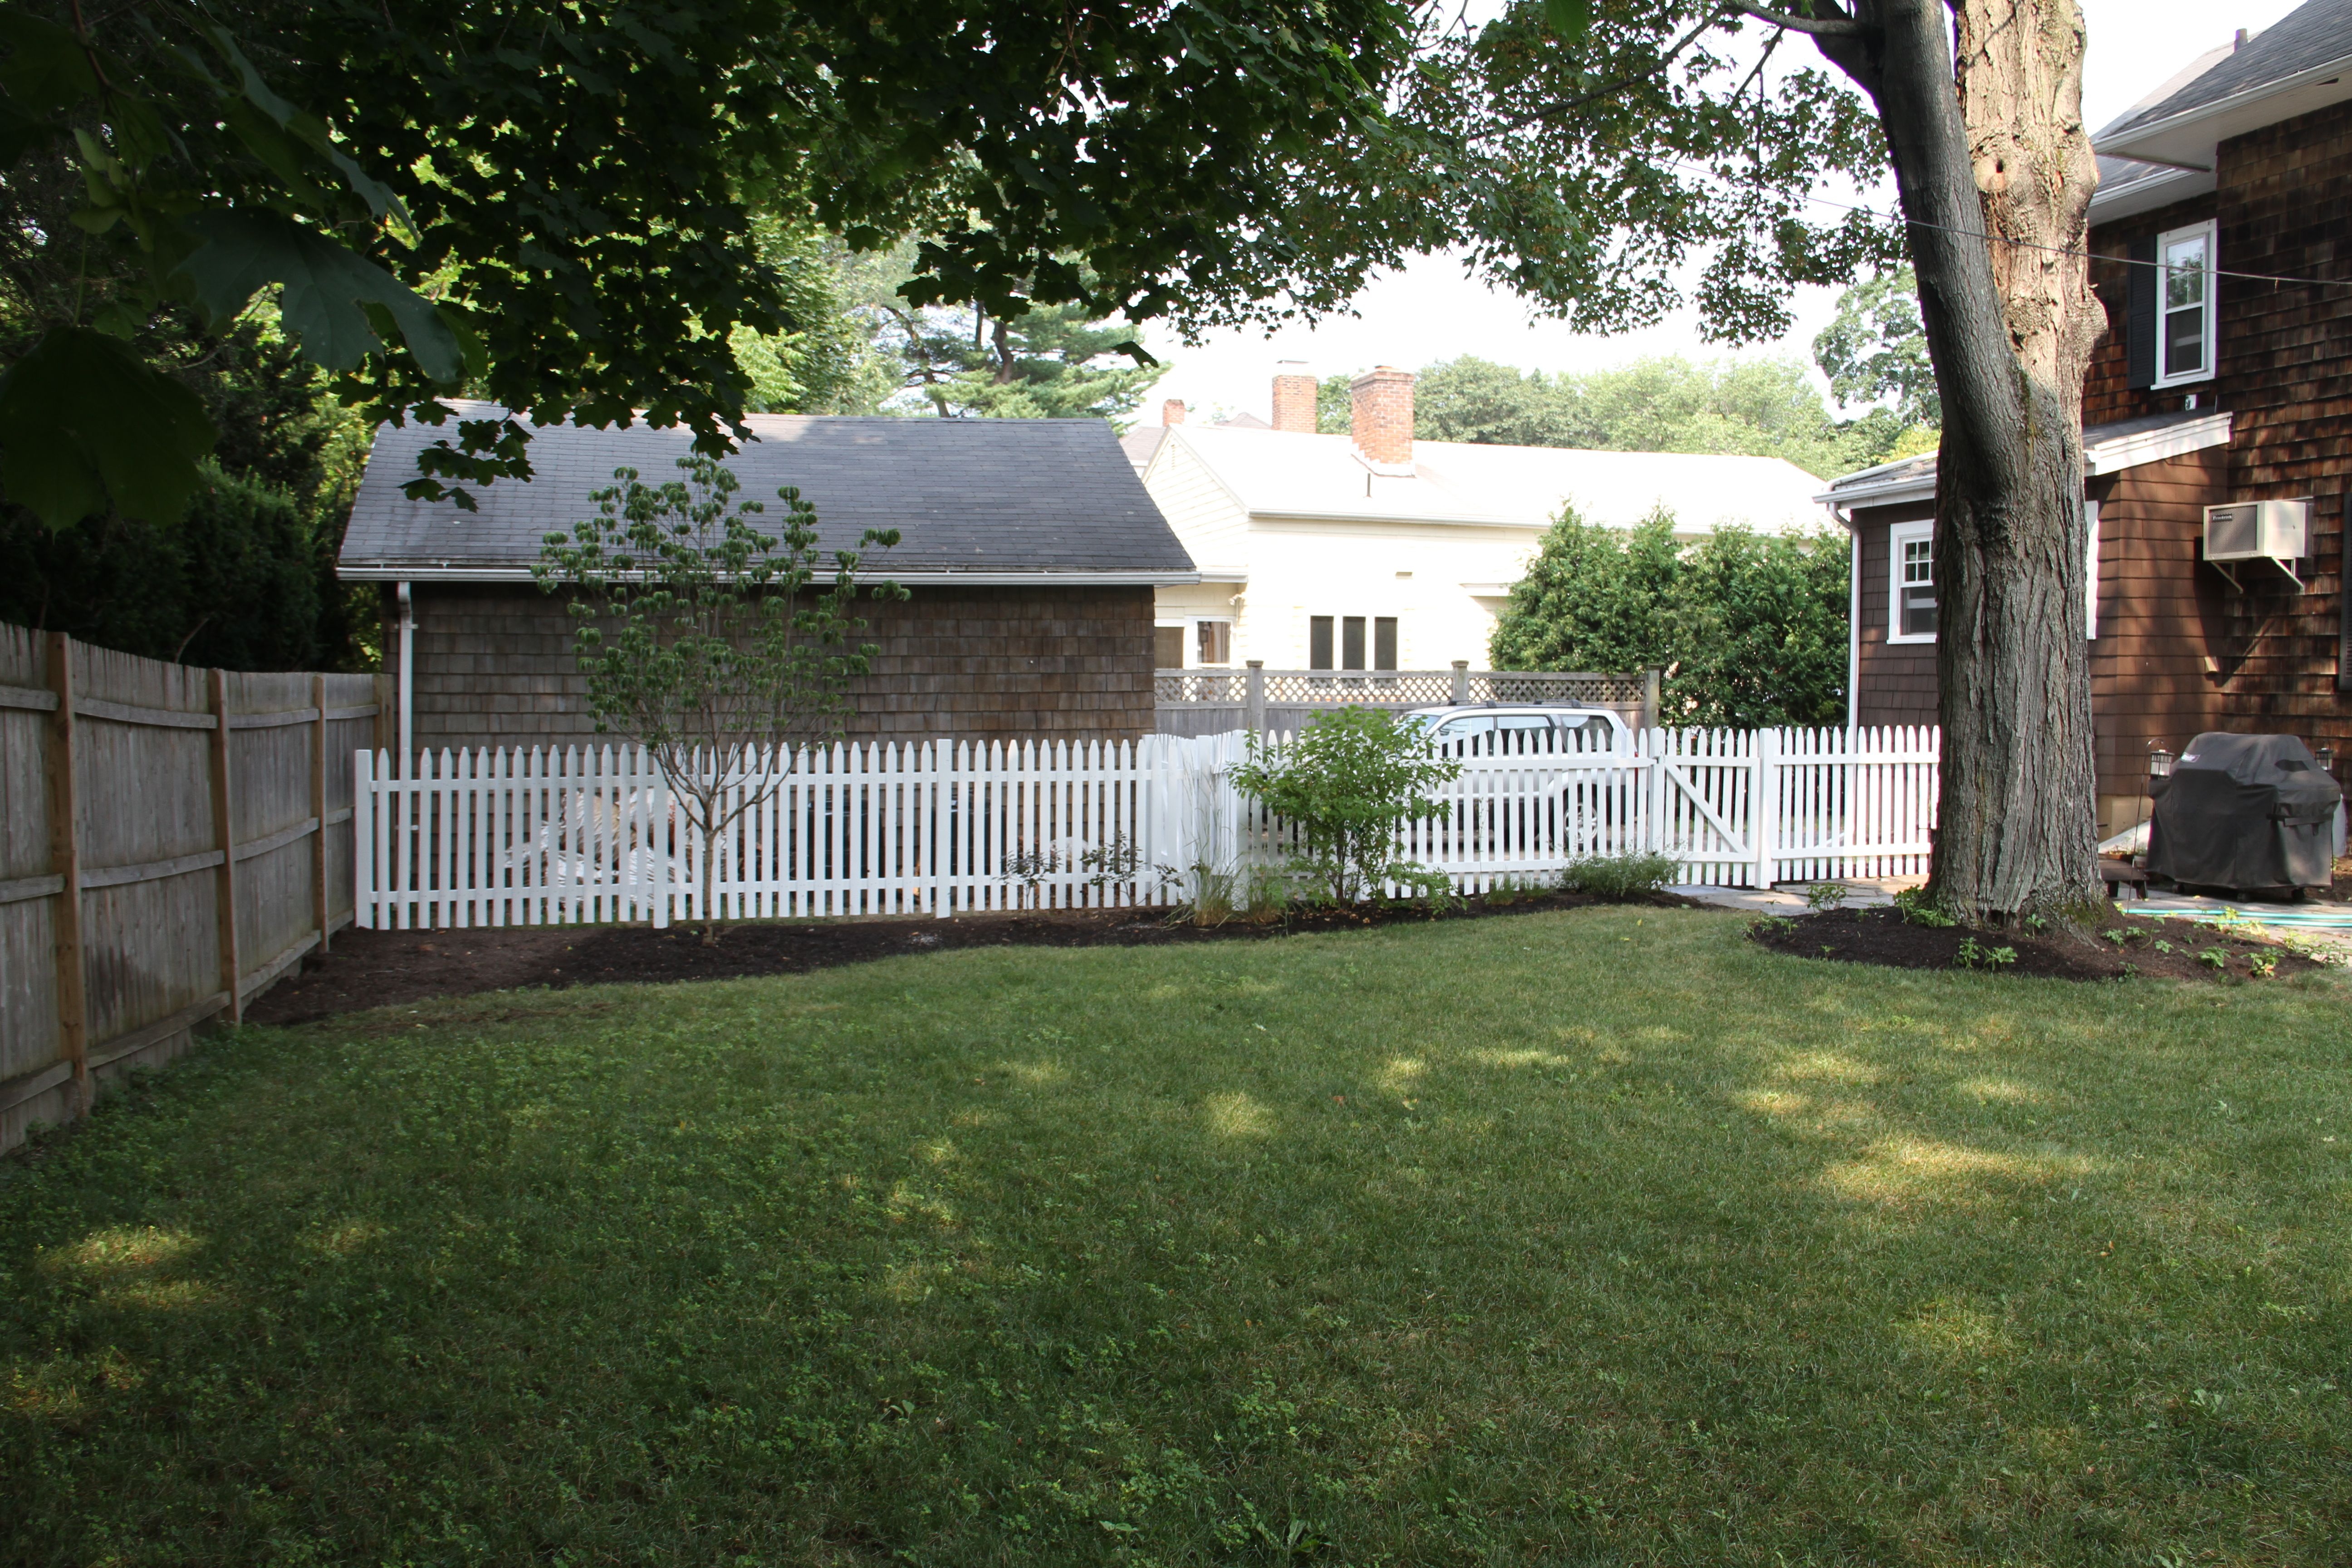 The white fencing makes the yard seem so charming and clean. Not that we don't appreciate silvery wood - we just think that the white fits in with the house better.